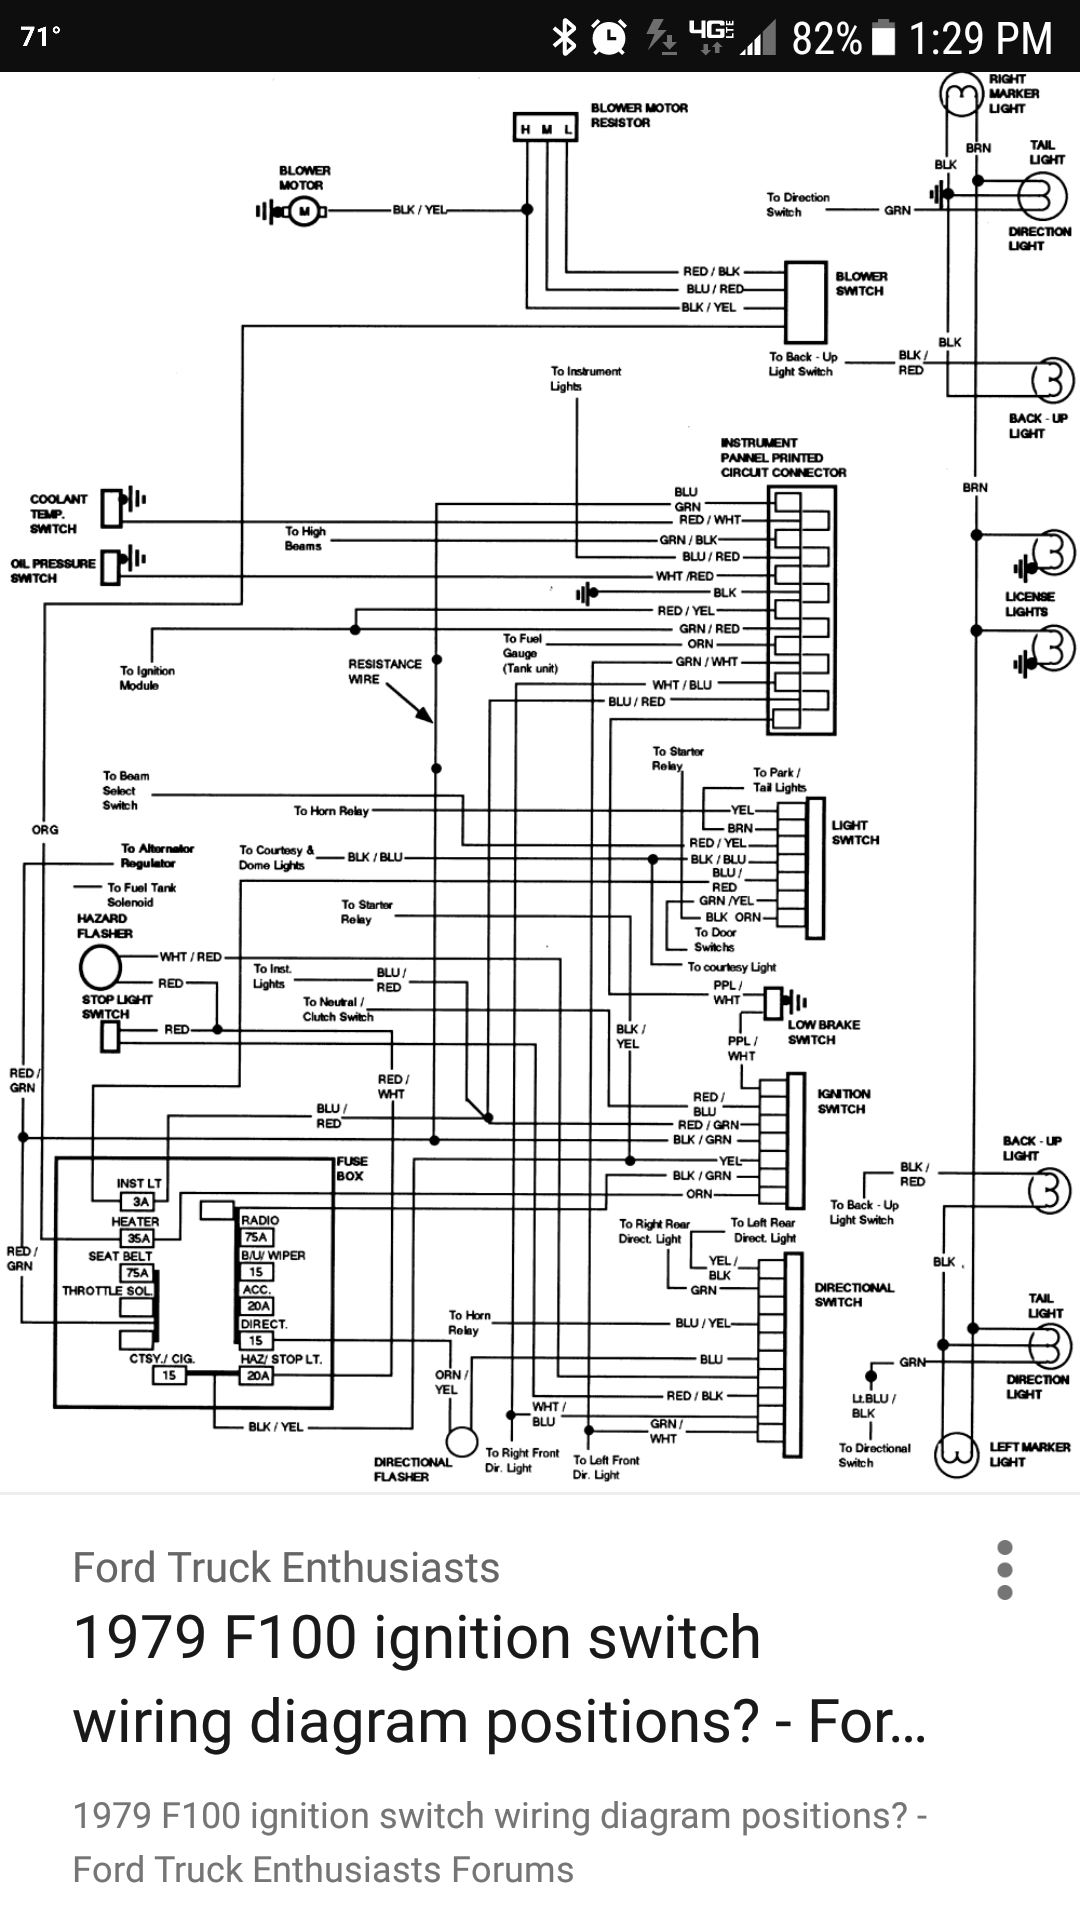 How To Read Wiring Diagram - Ford F150 Forum